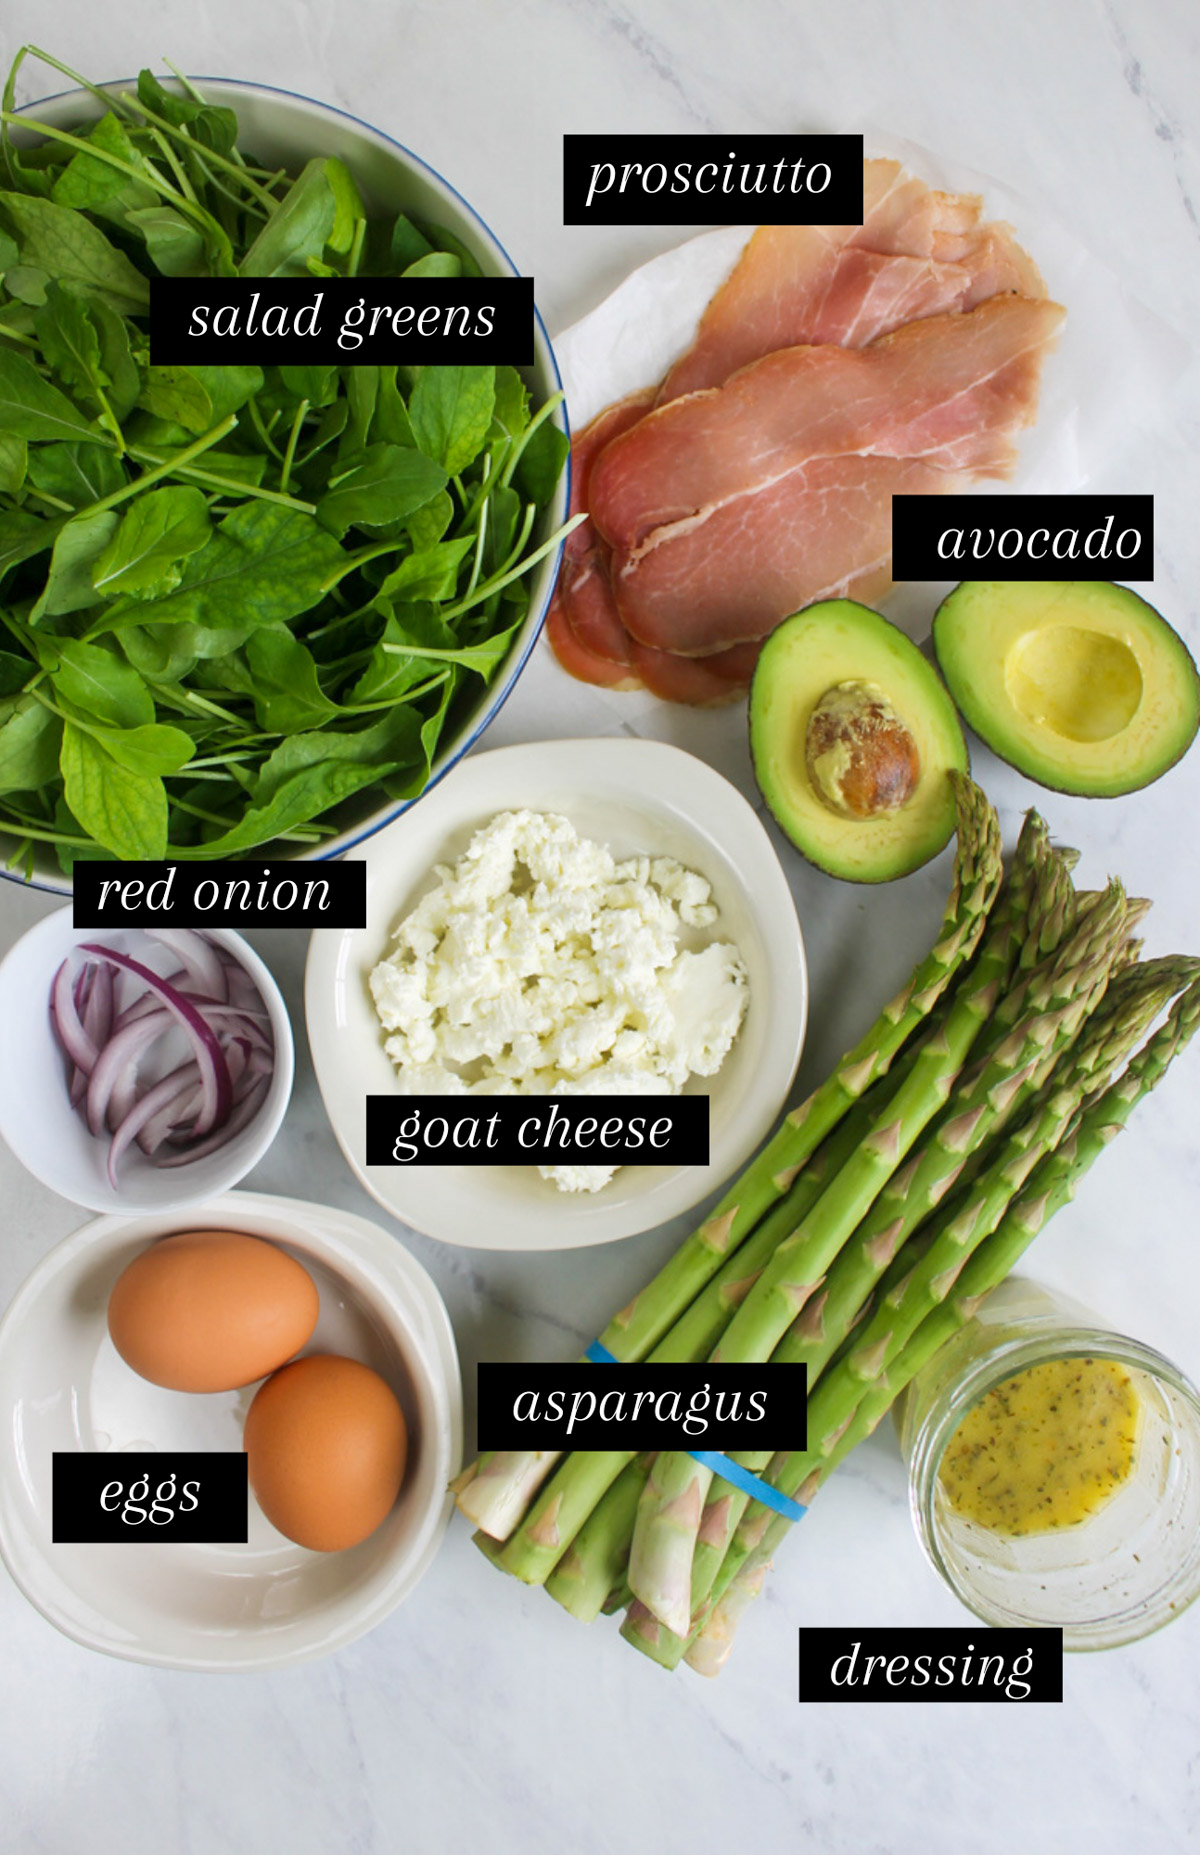 Labeled ingredients for Asparagus Salad with Crispy Prosciutto.